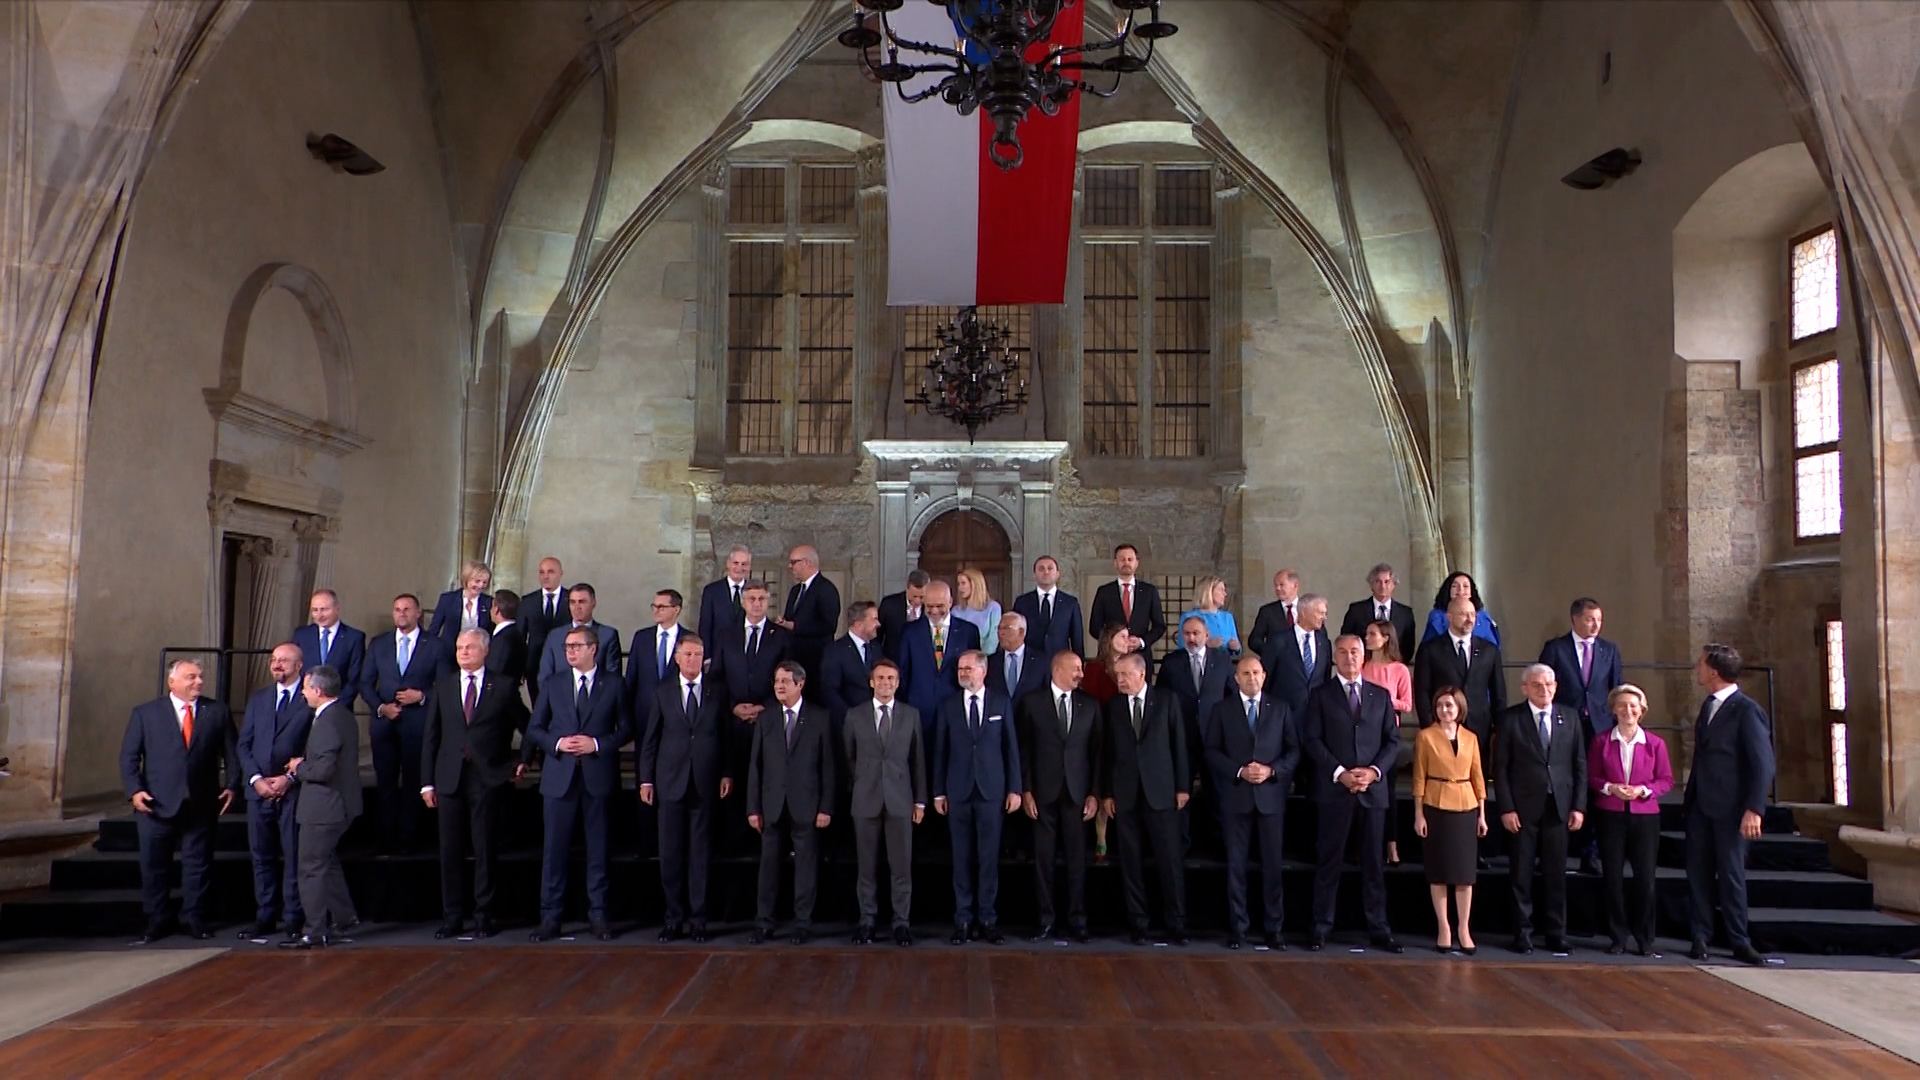 The European Political Community was inaugurated in Prague by 44 European leaders spanning from Iceland to Turkey. /Ceska Televize